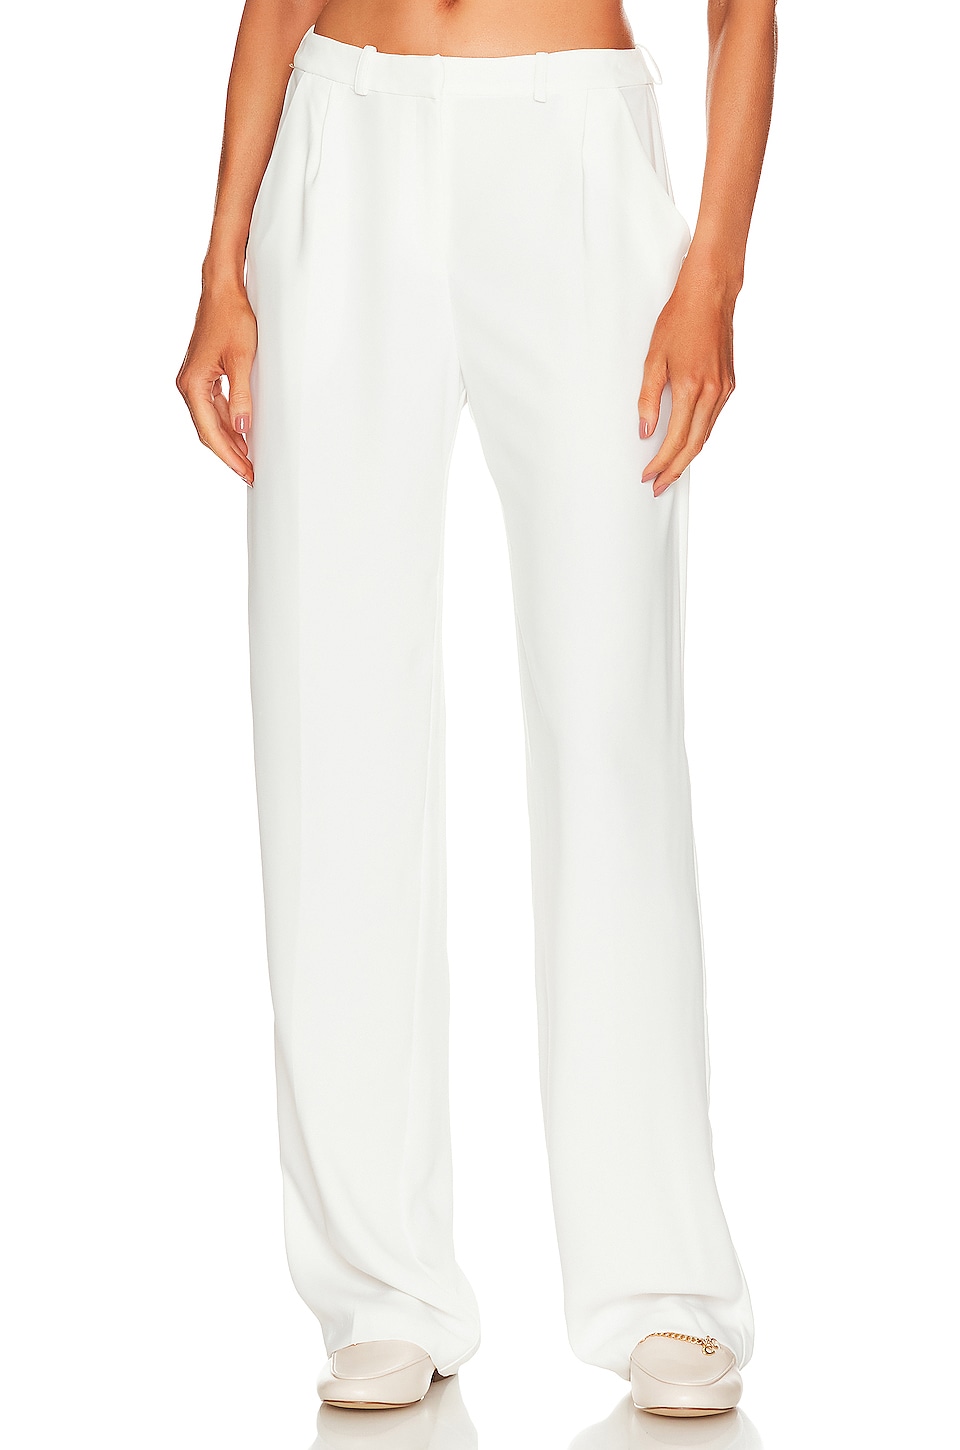 Trousers for women – Buy women's trousers online - Newhouse